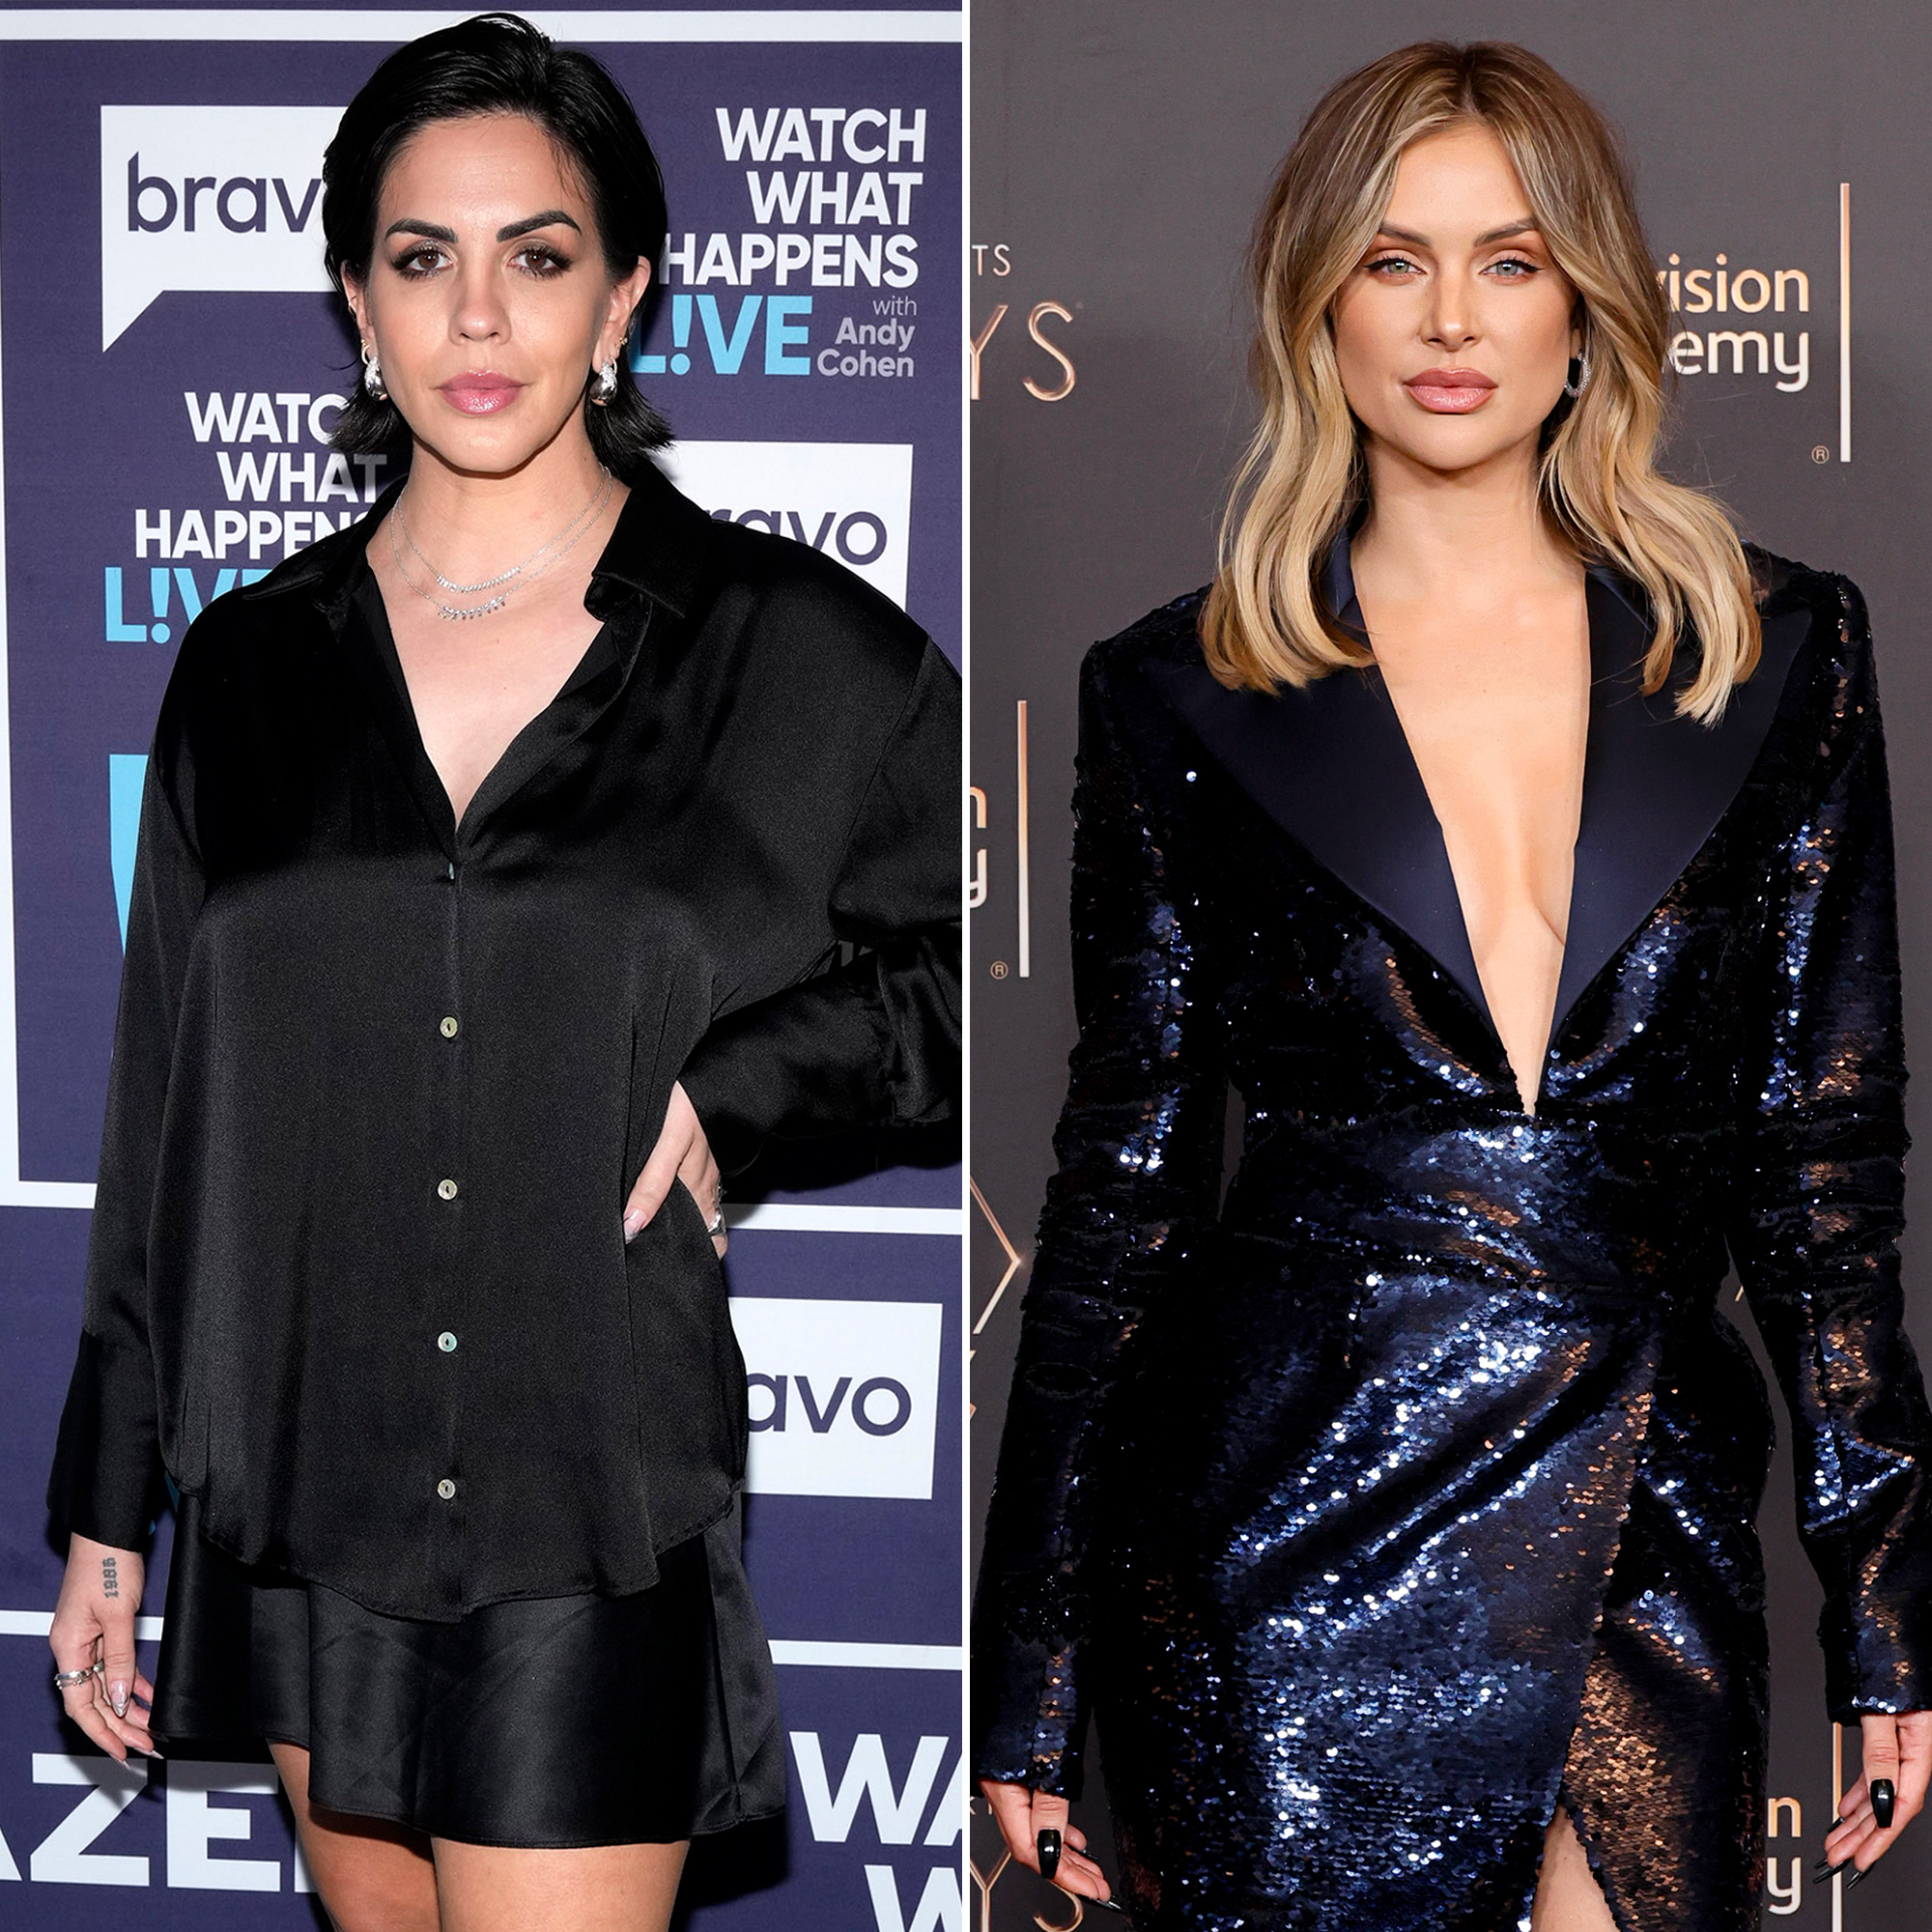 VPR’s Katie Maloney Can’t Forgive Lala Kent After She Violated Her Trust